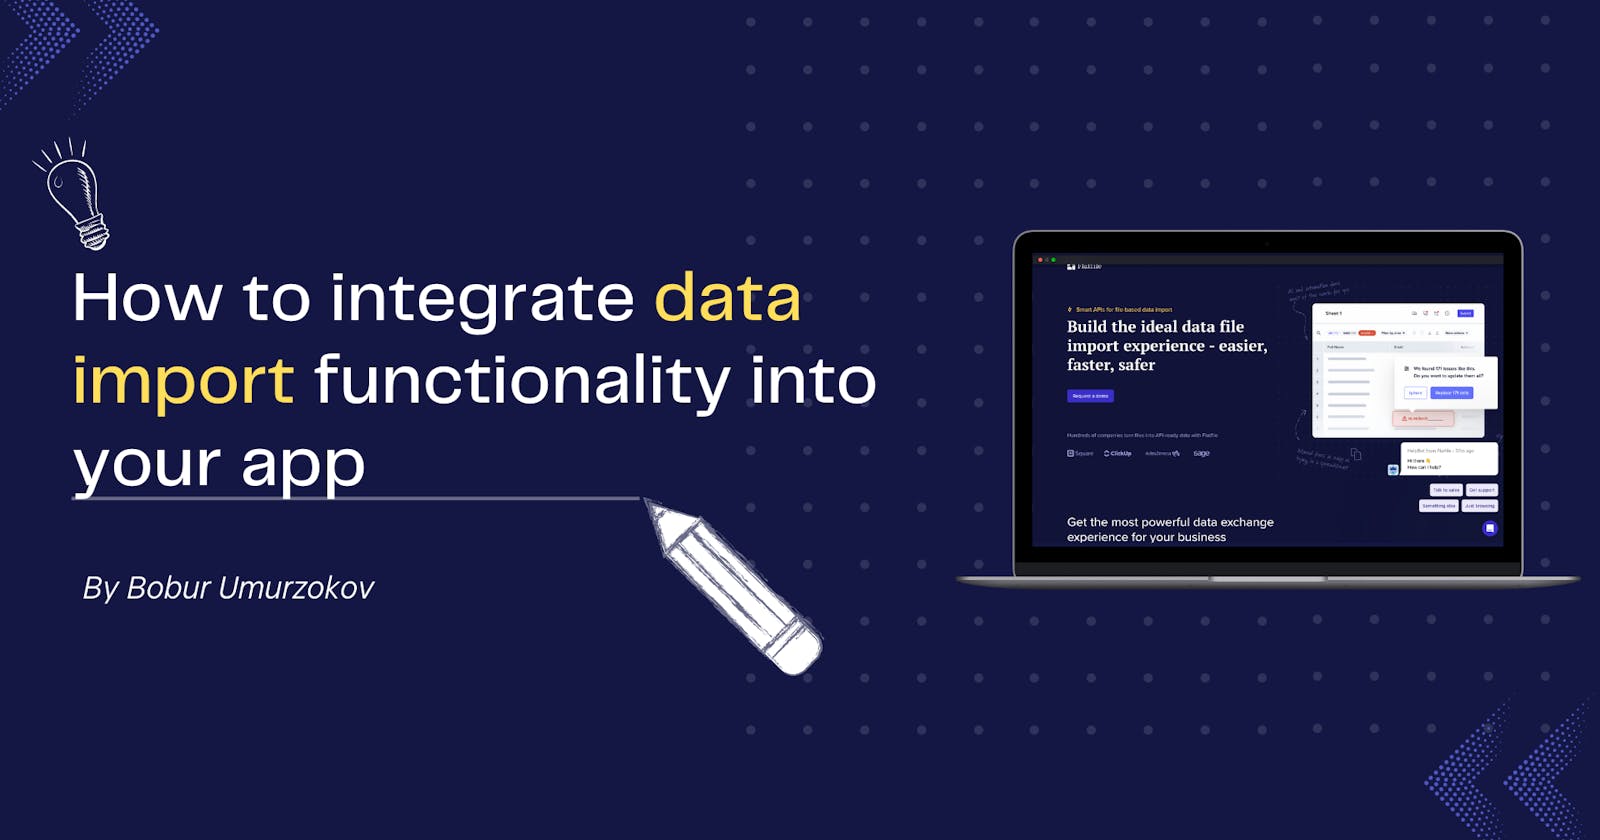 How to integrate data import functionality into your app